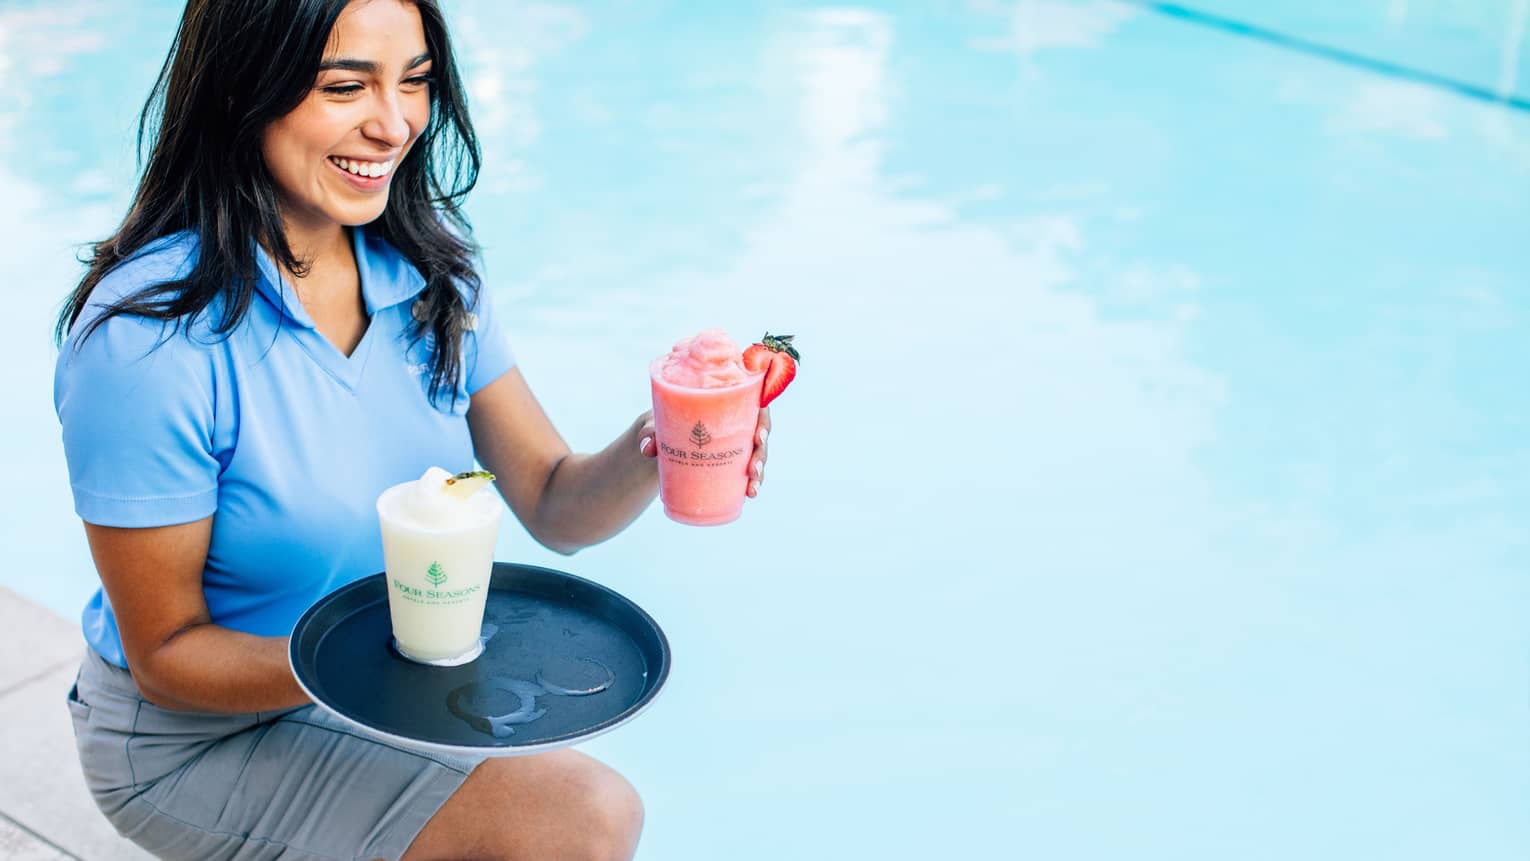 Staff member smiling in blue polo shirt kneeling at poolside with tray and two frozen drinks